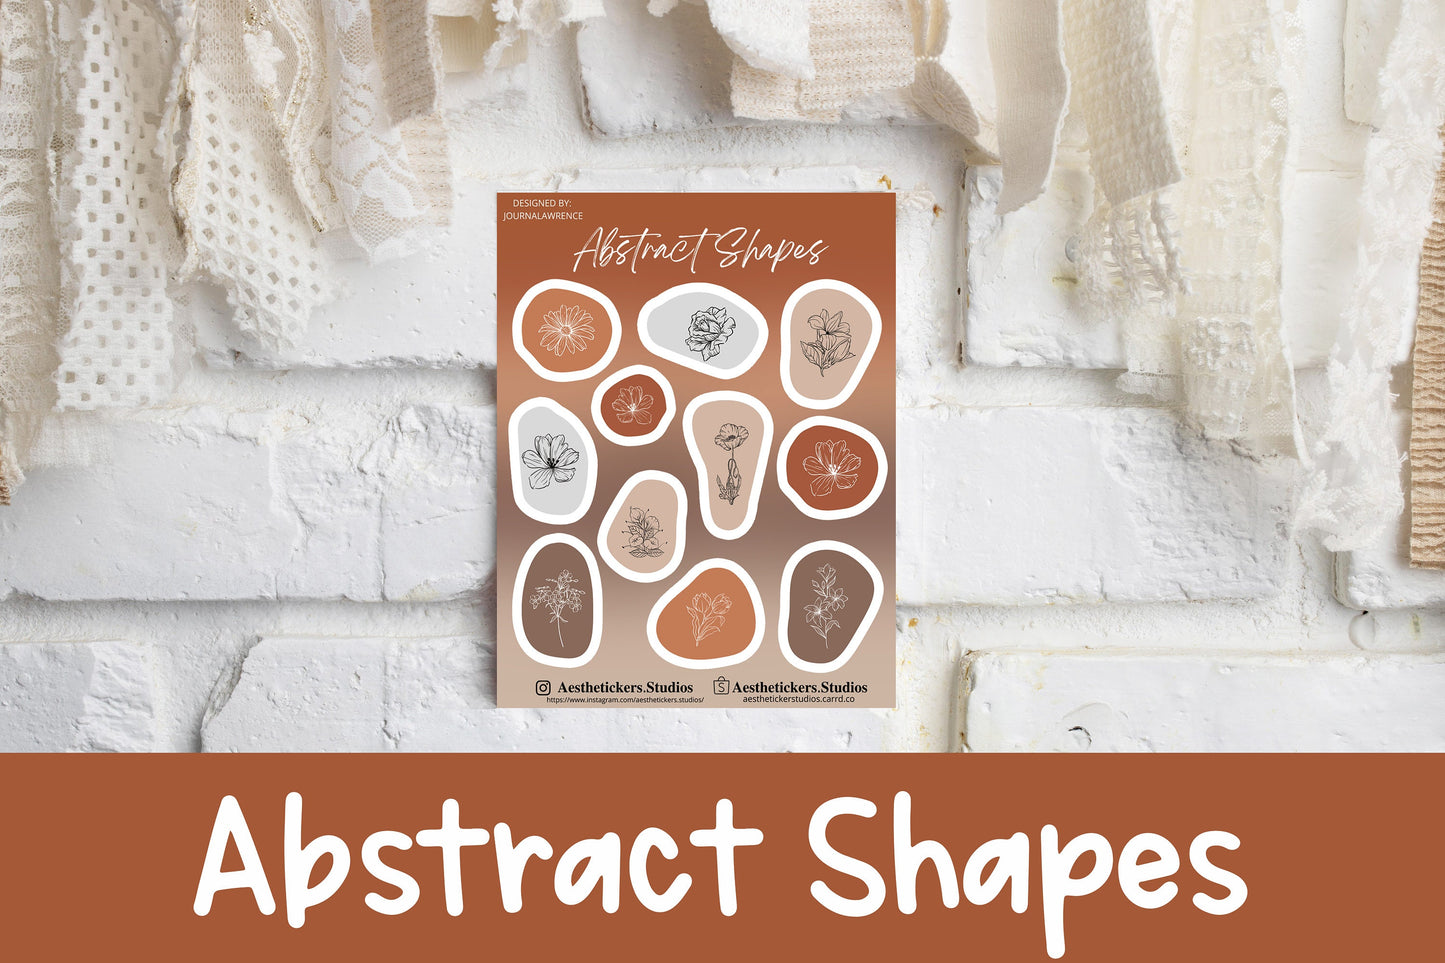 Abstract Shapes by Aesthetickers Studios